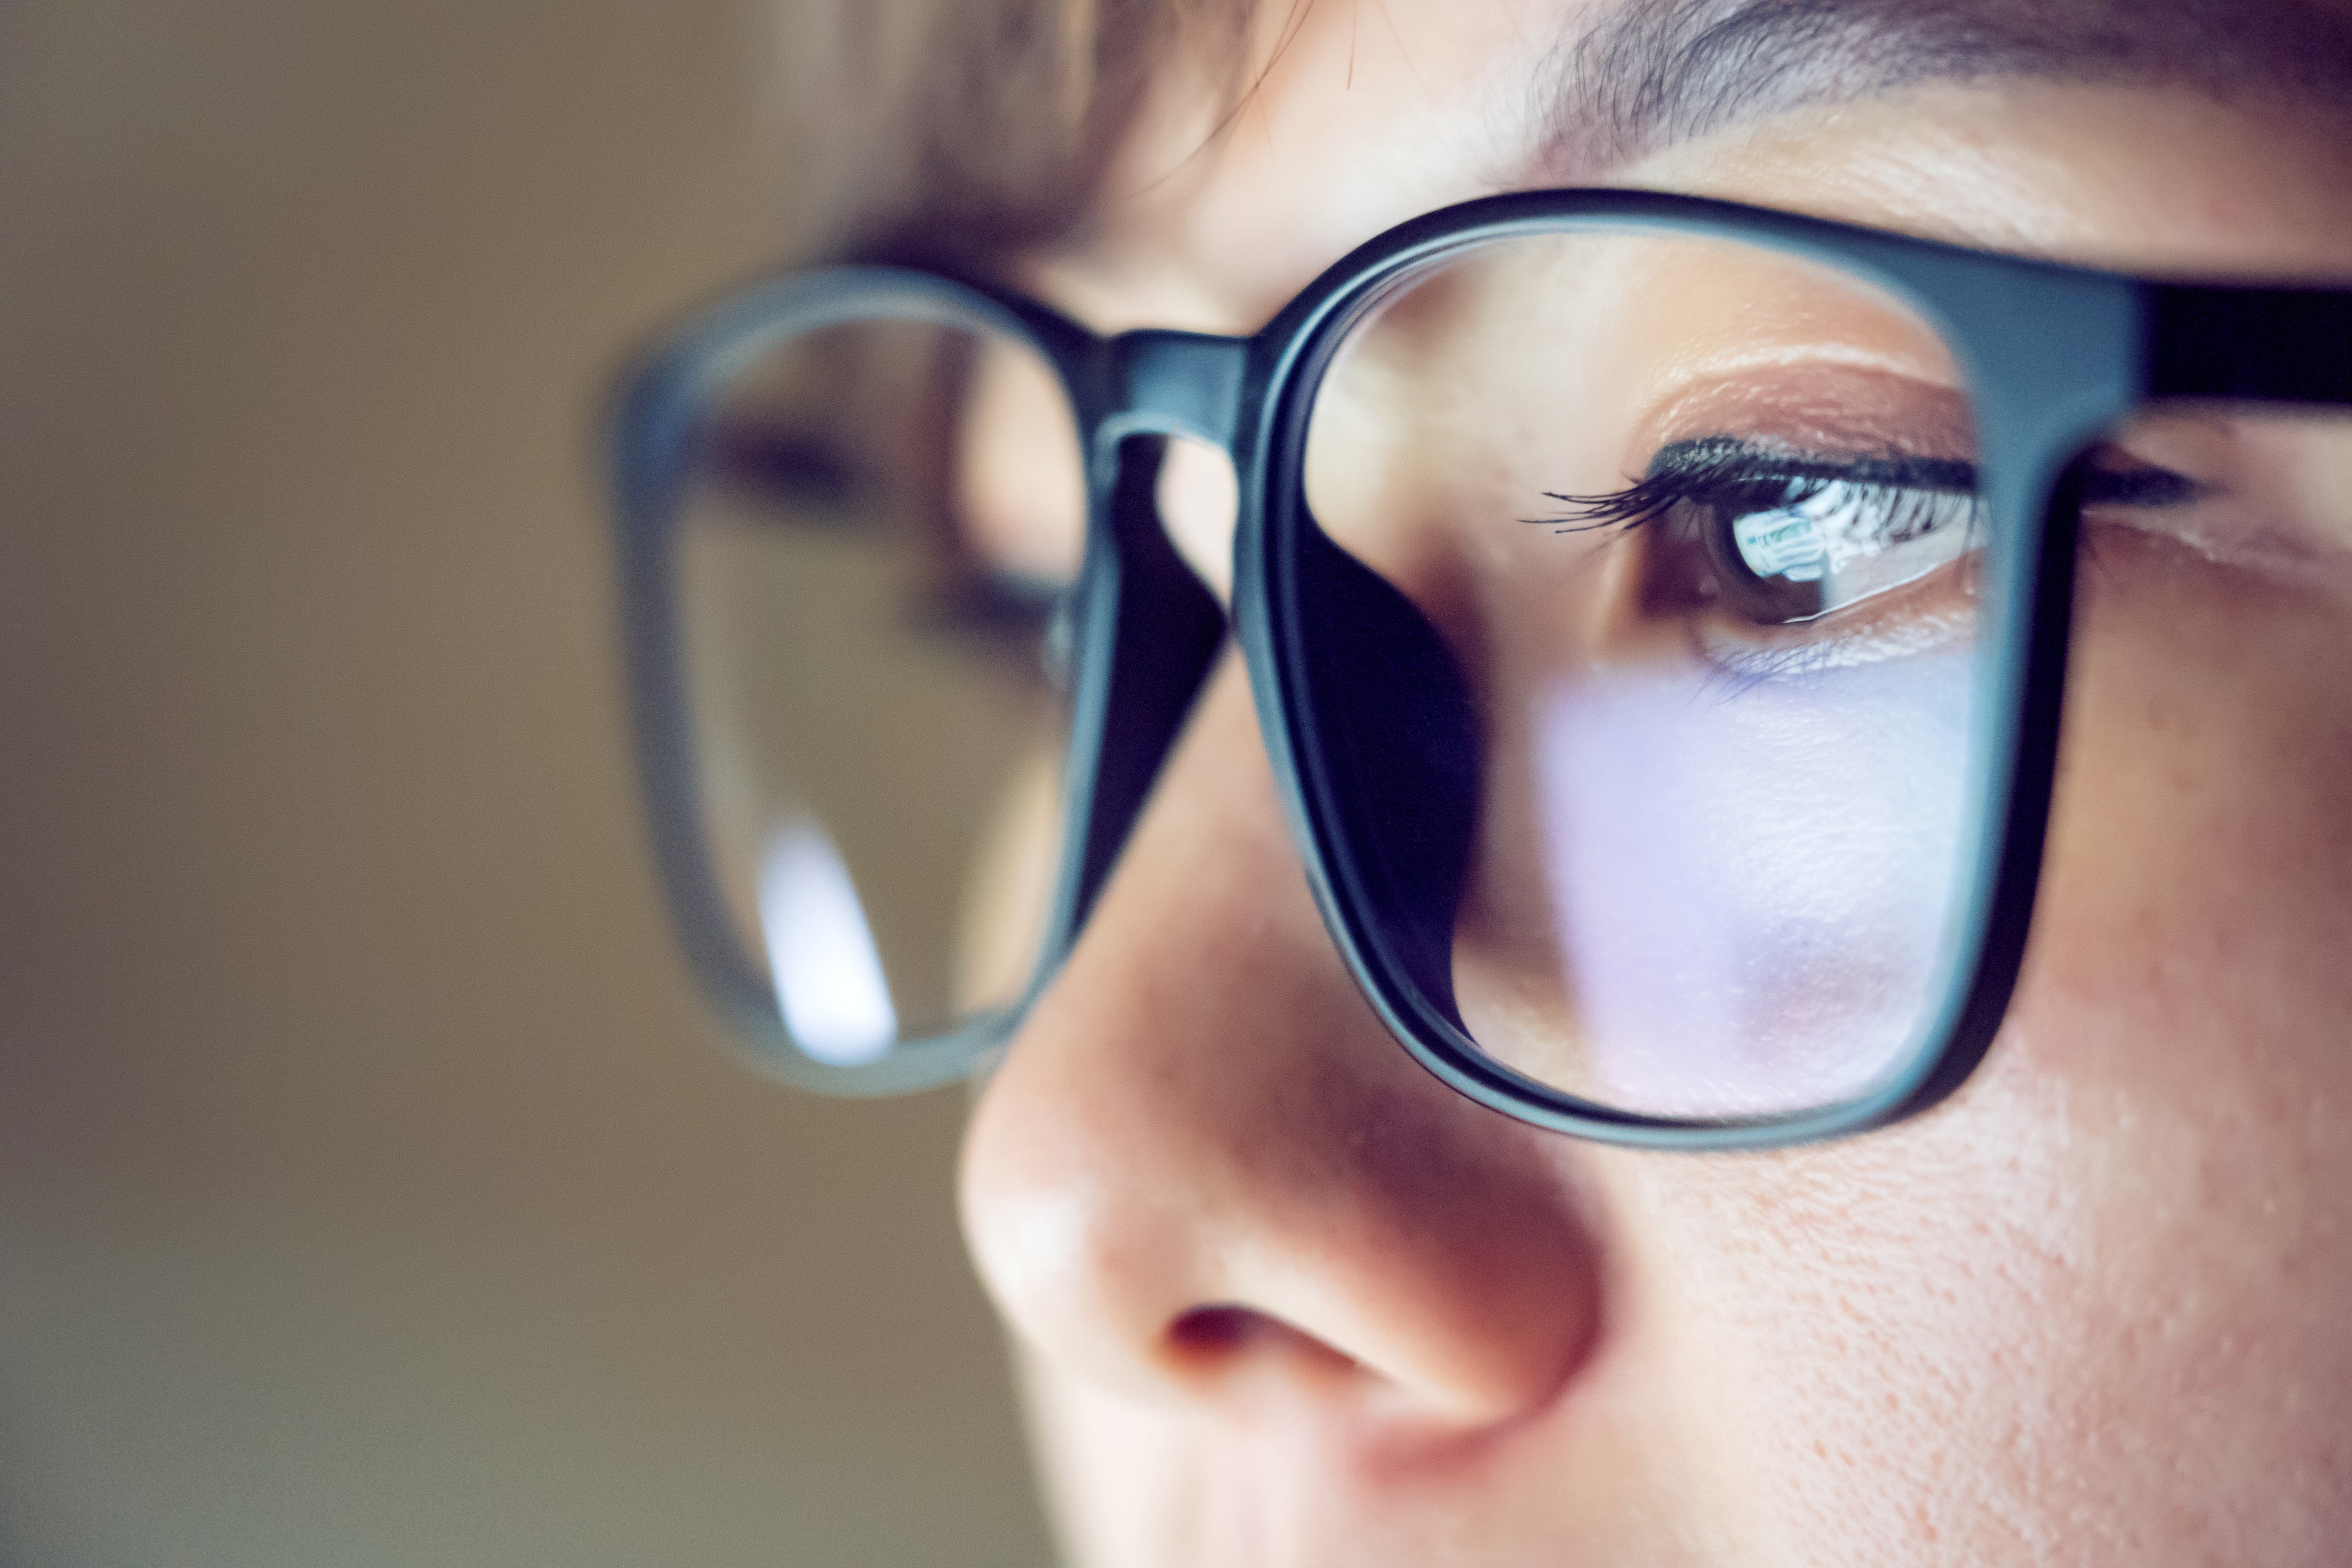 Coronavirus less likely to infect glasses wearers, study suggests